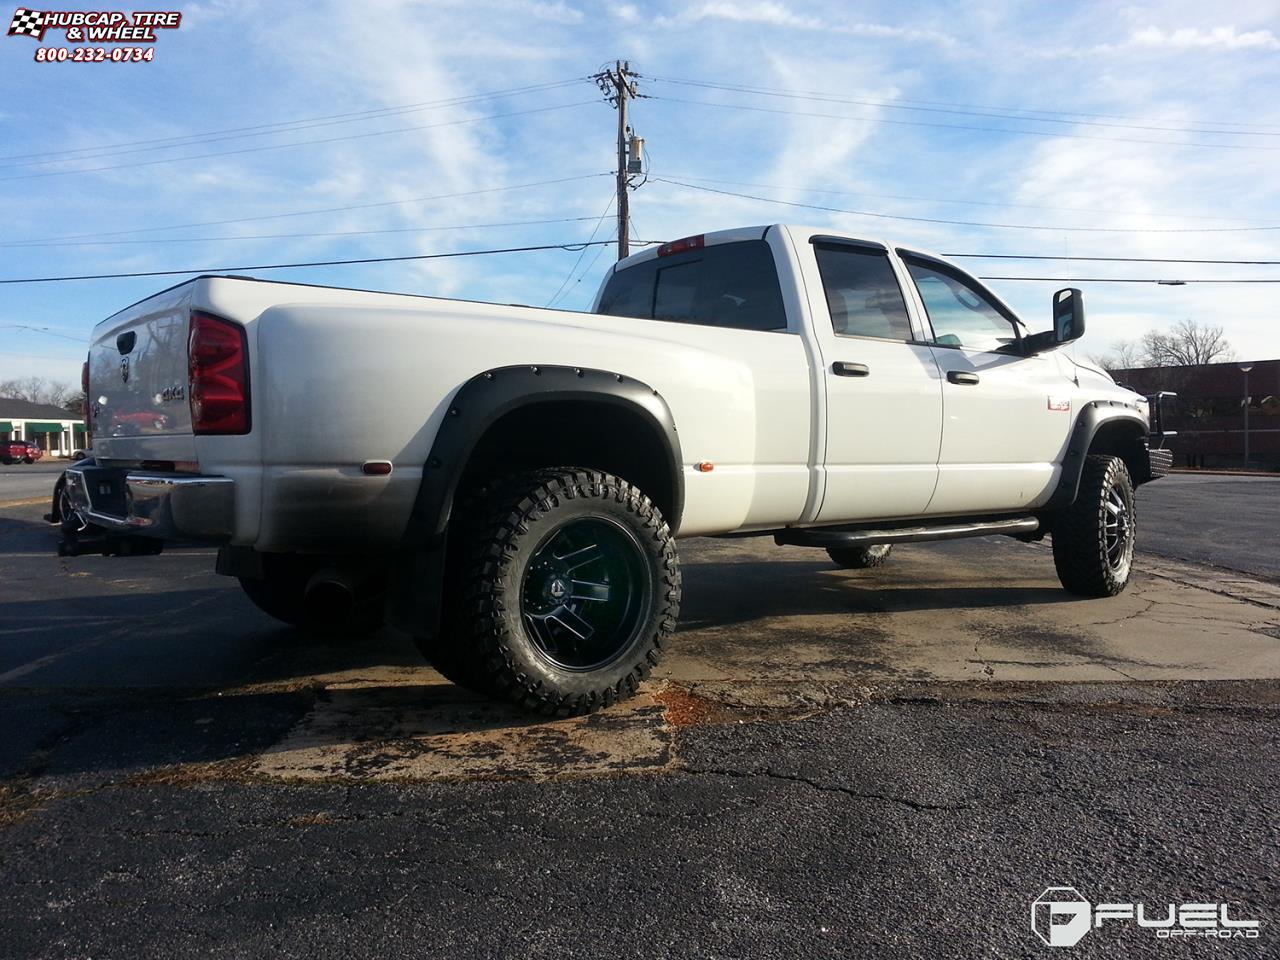 vehicle gallery/dodge ram 3500 fuel maverick dually rear d538 20X8  Black & Milled wheels and rims